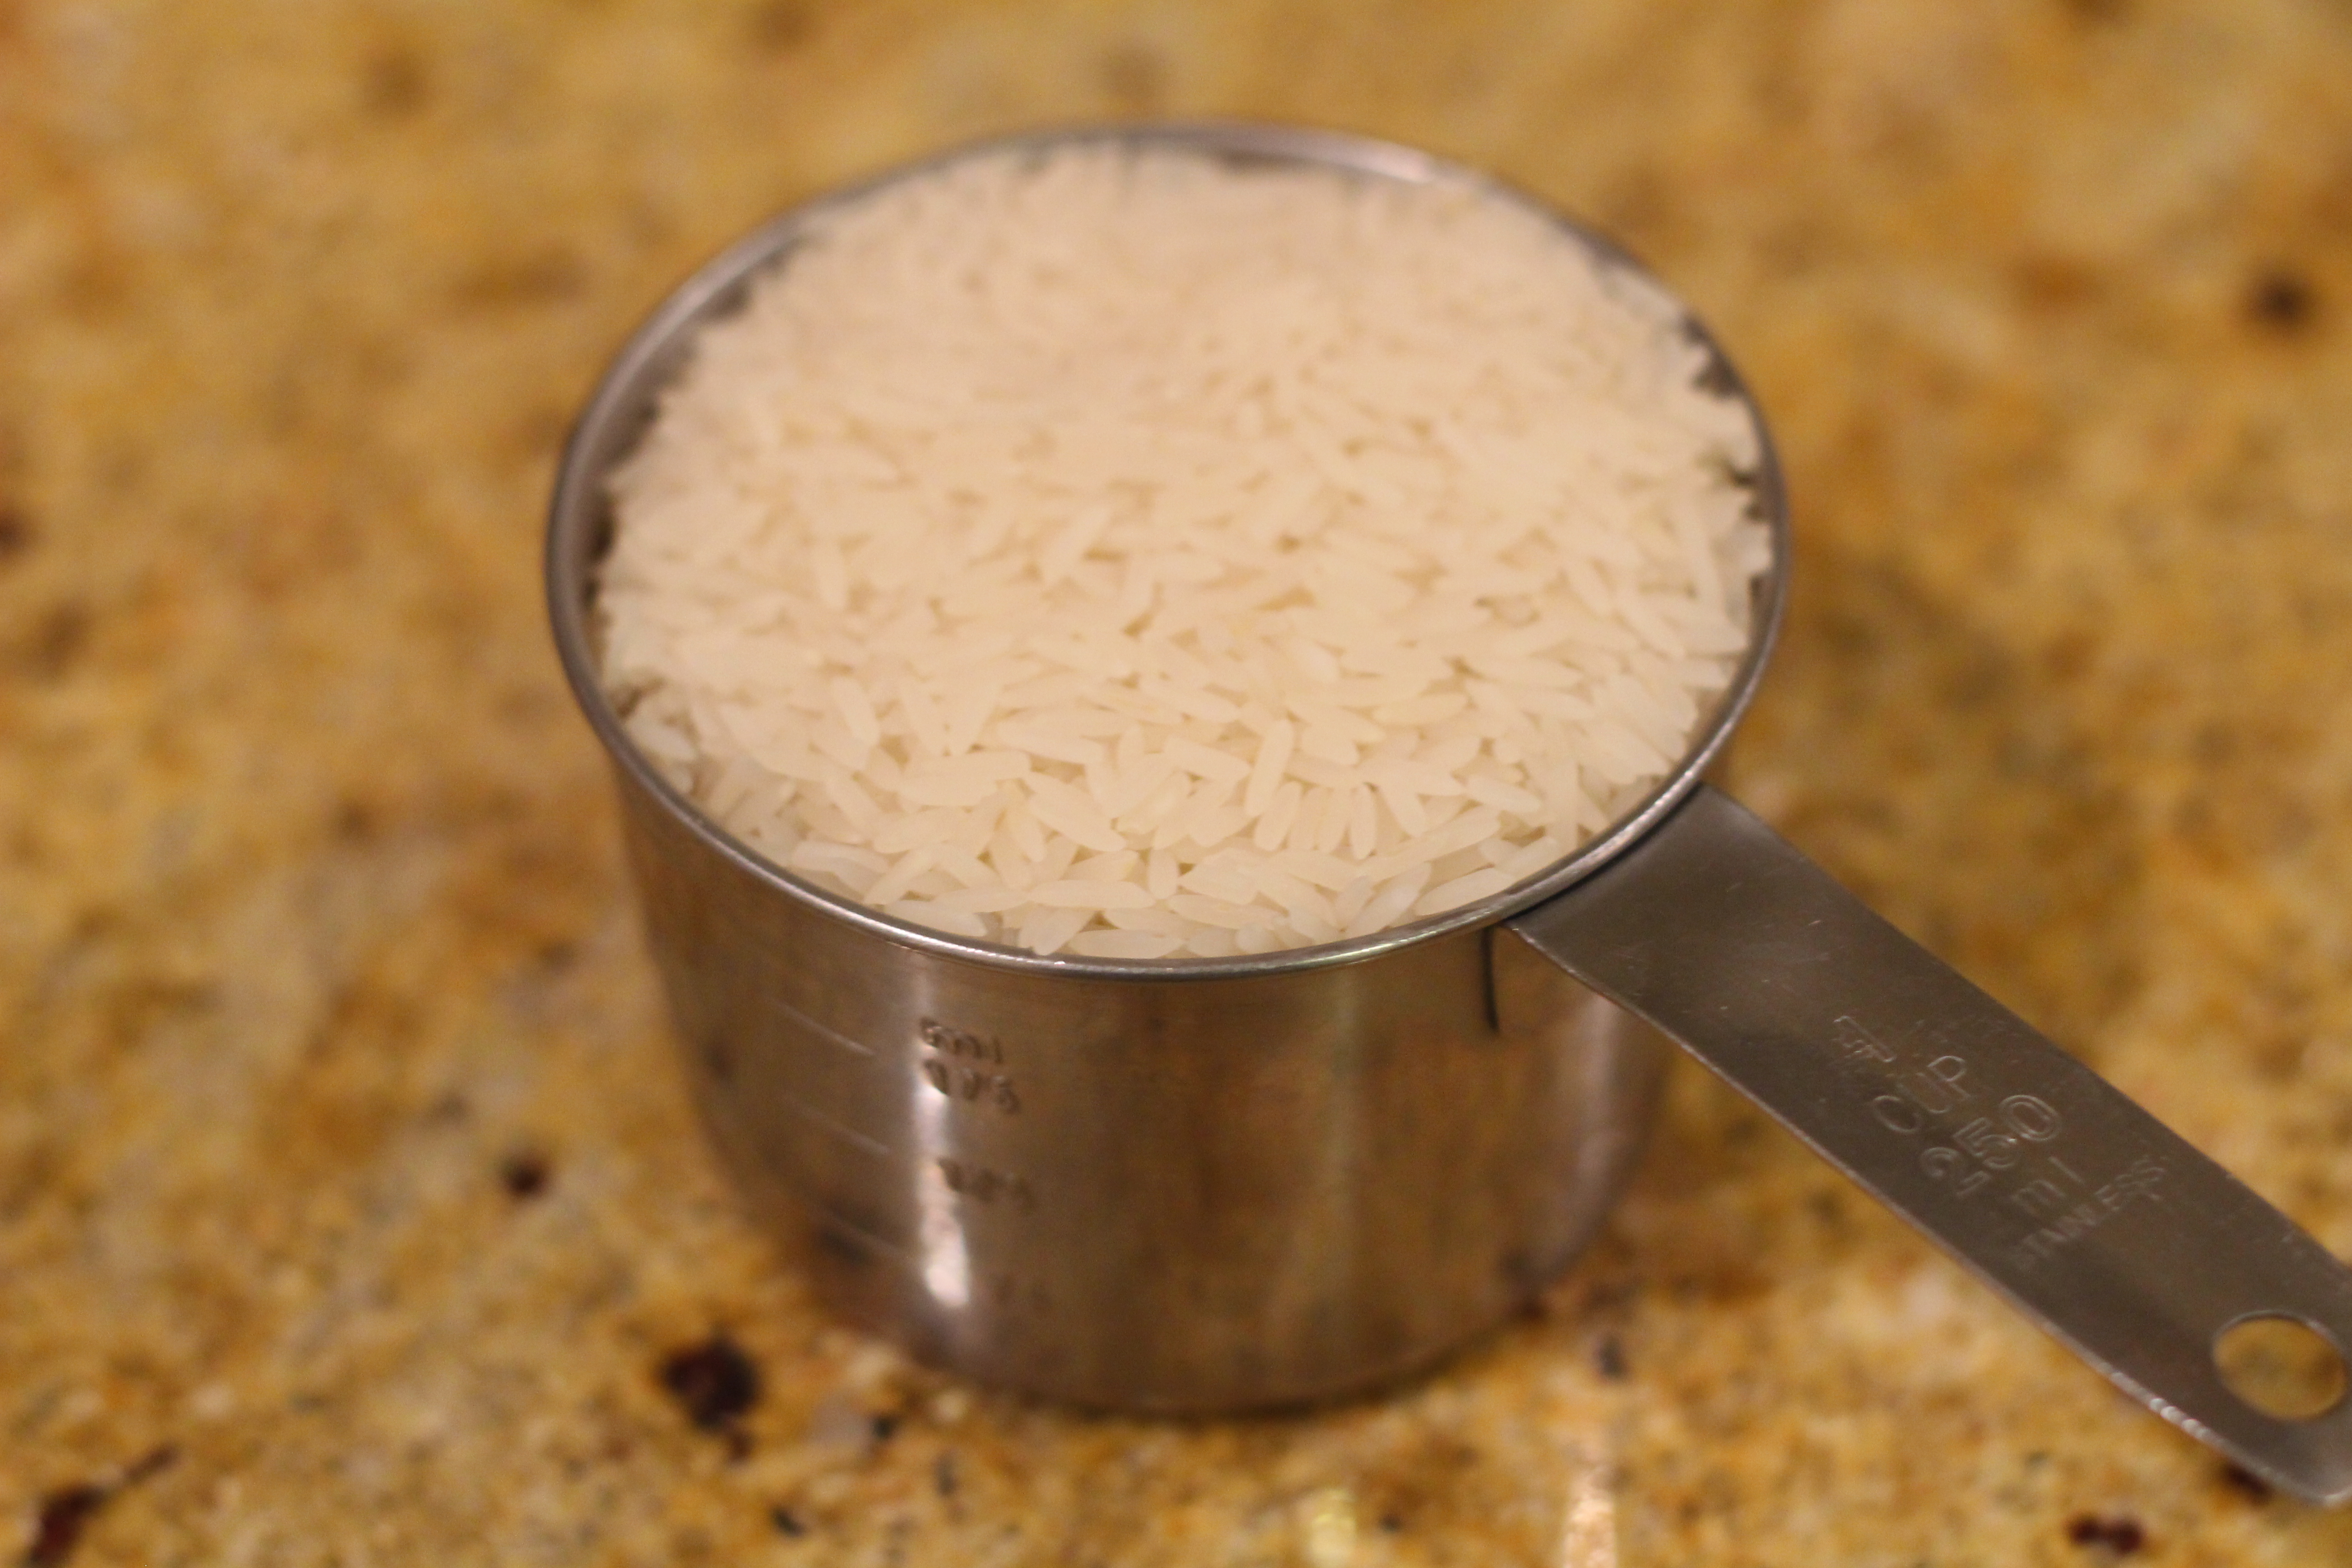 rice in measuring cup - 1 cup of rice